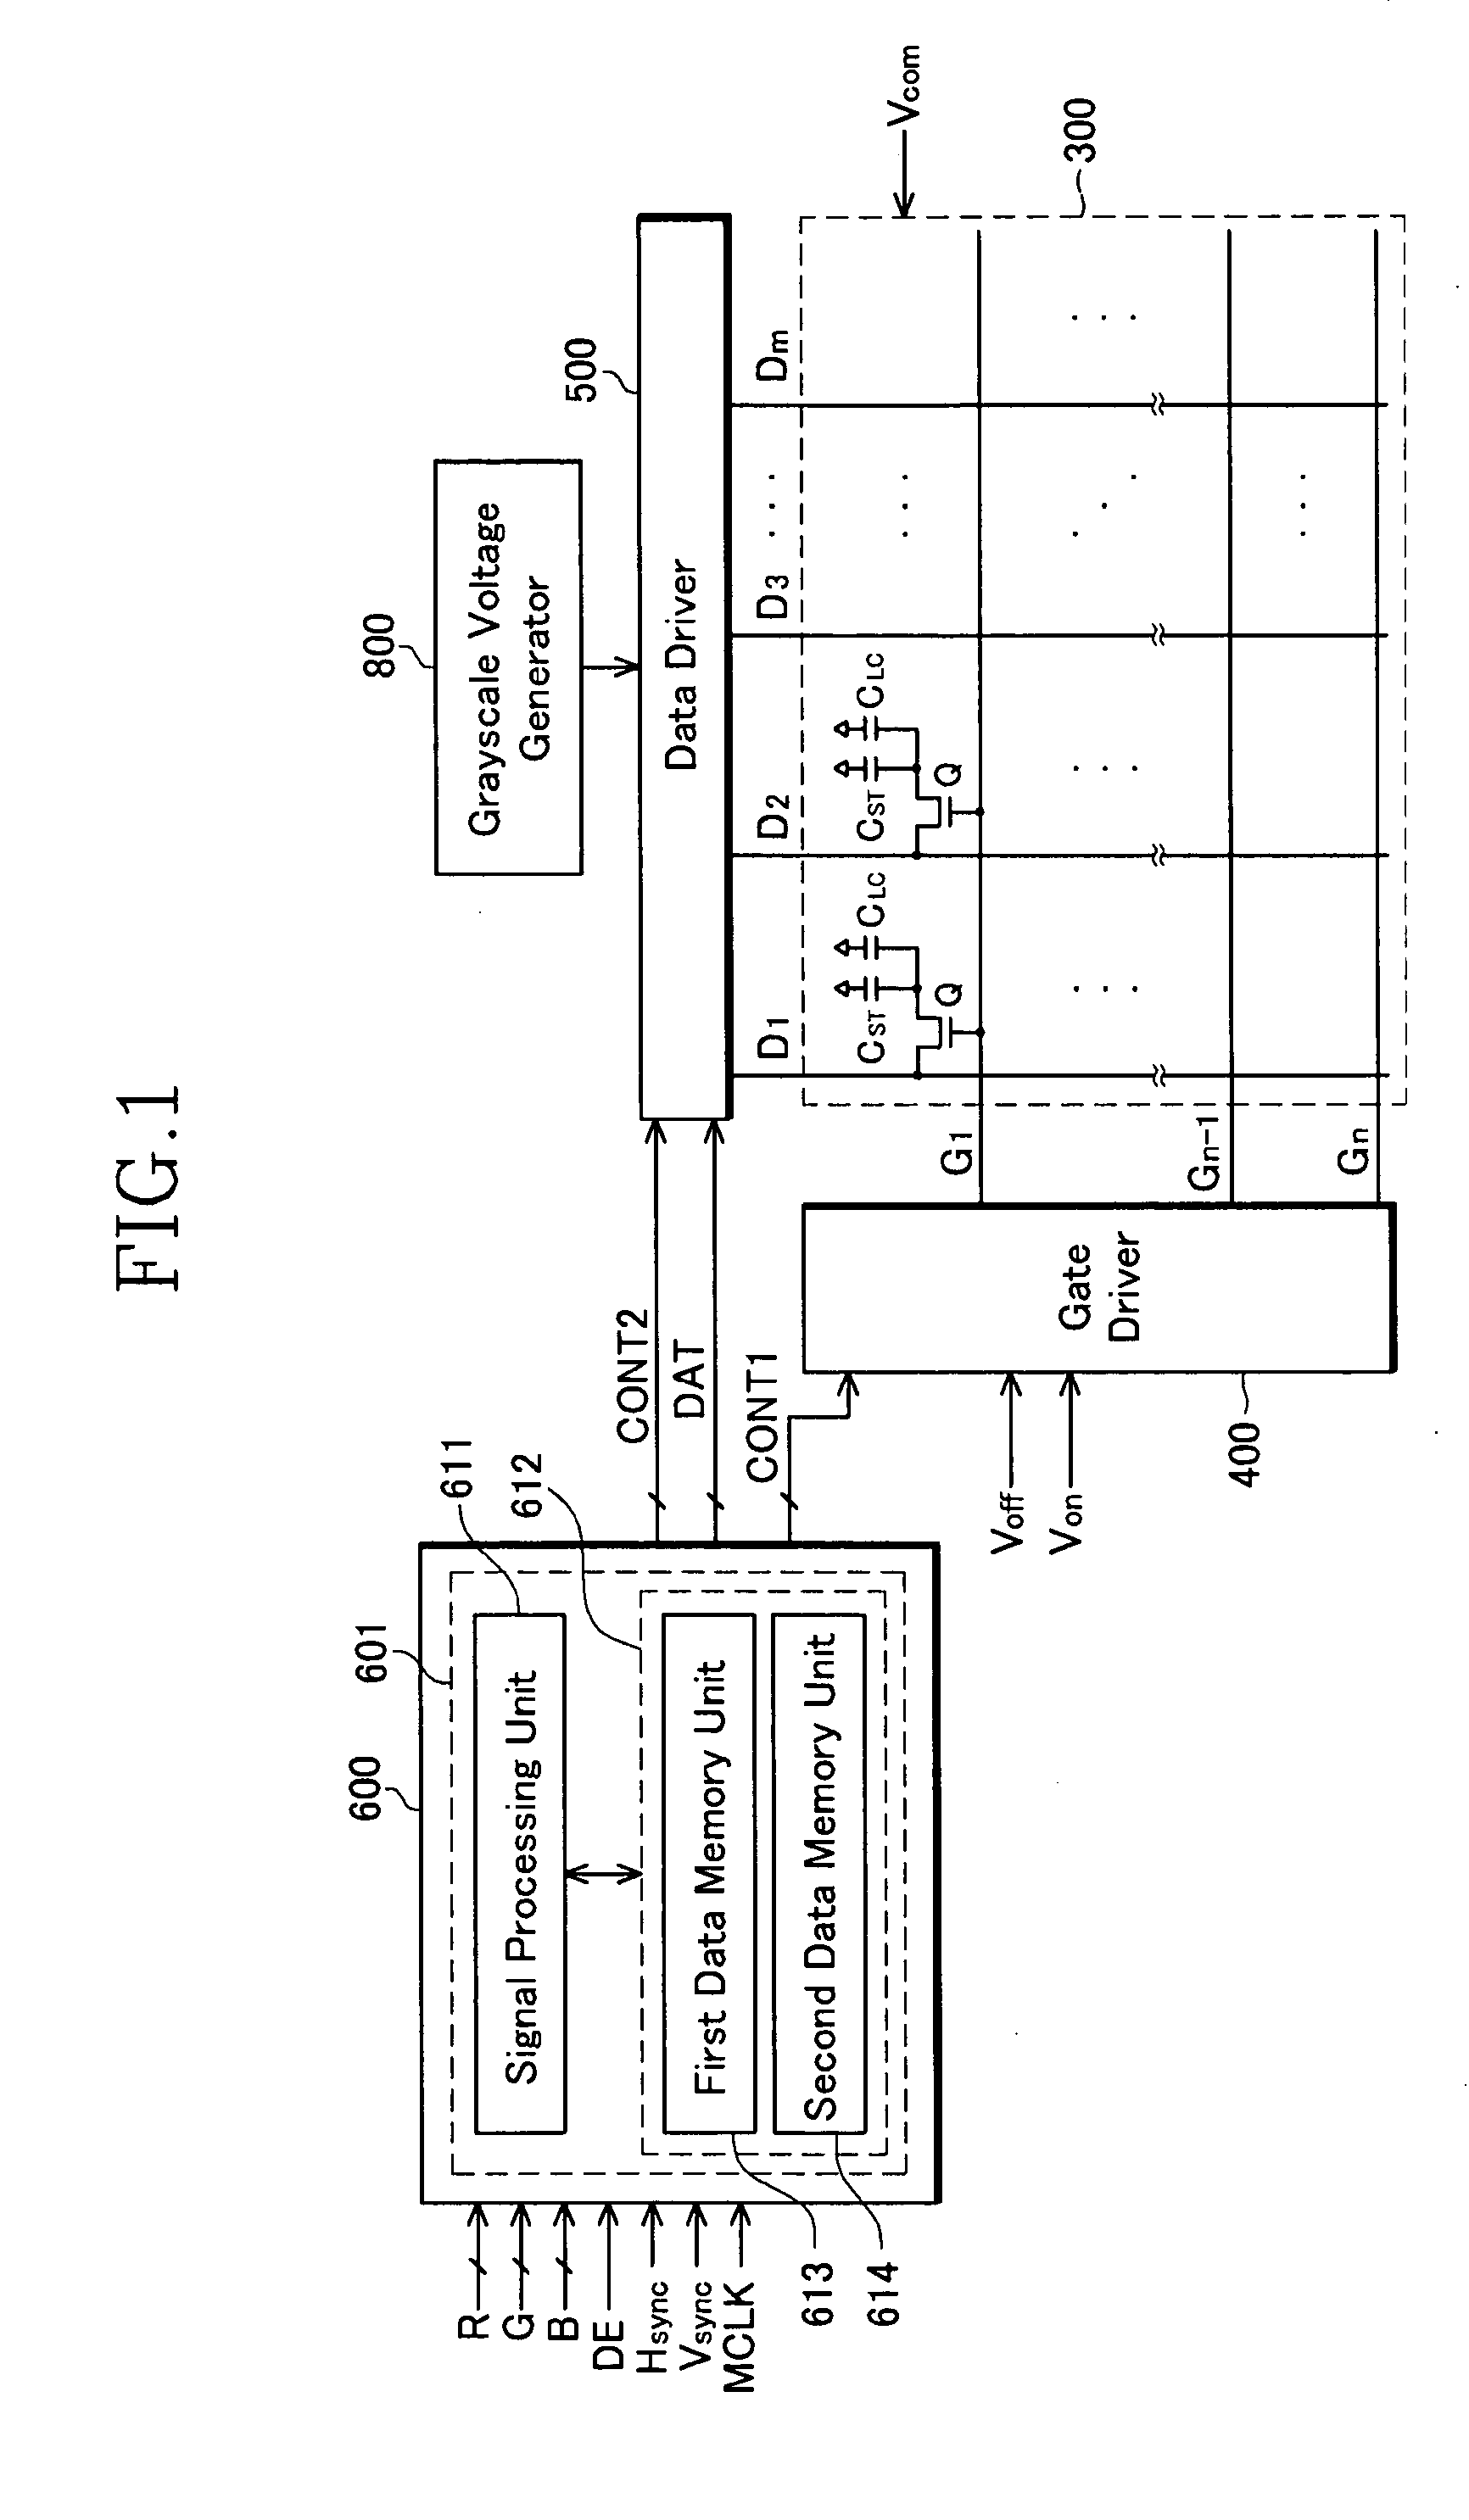 Driver of display device